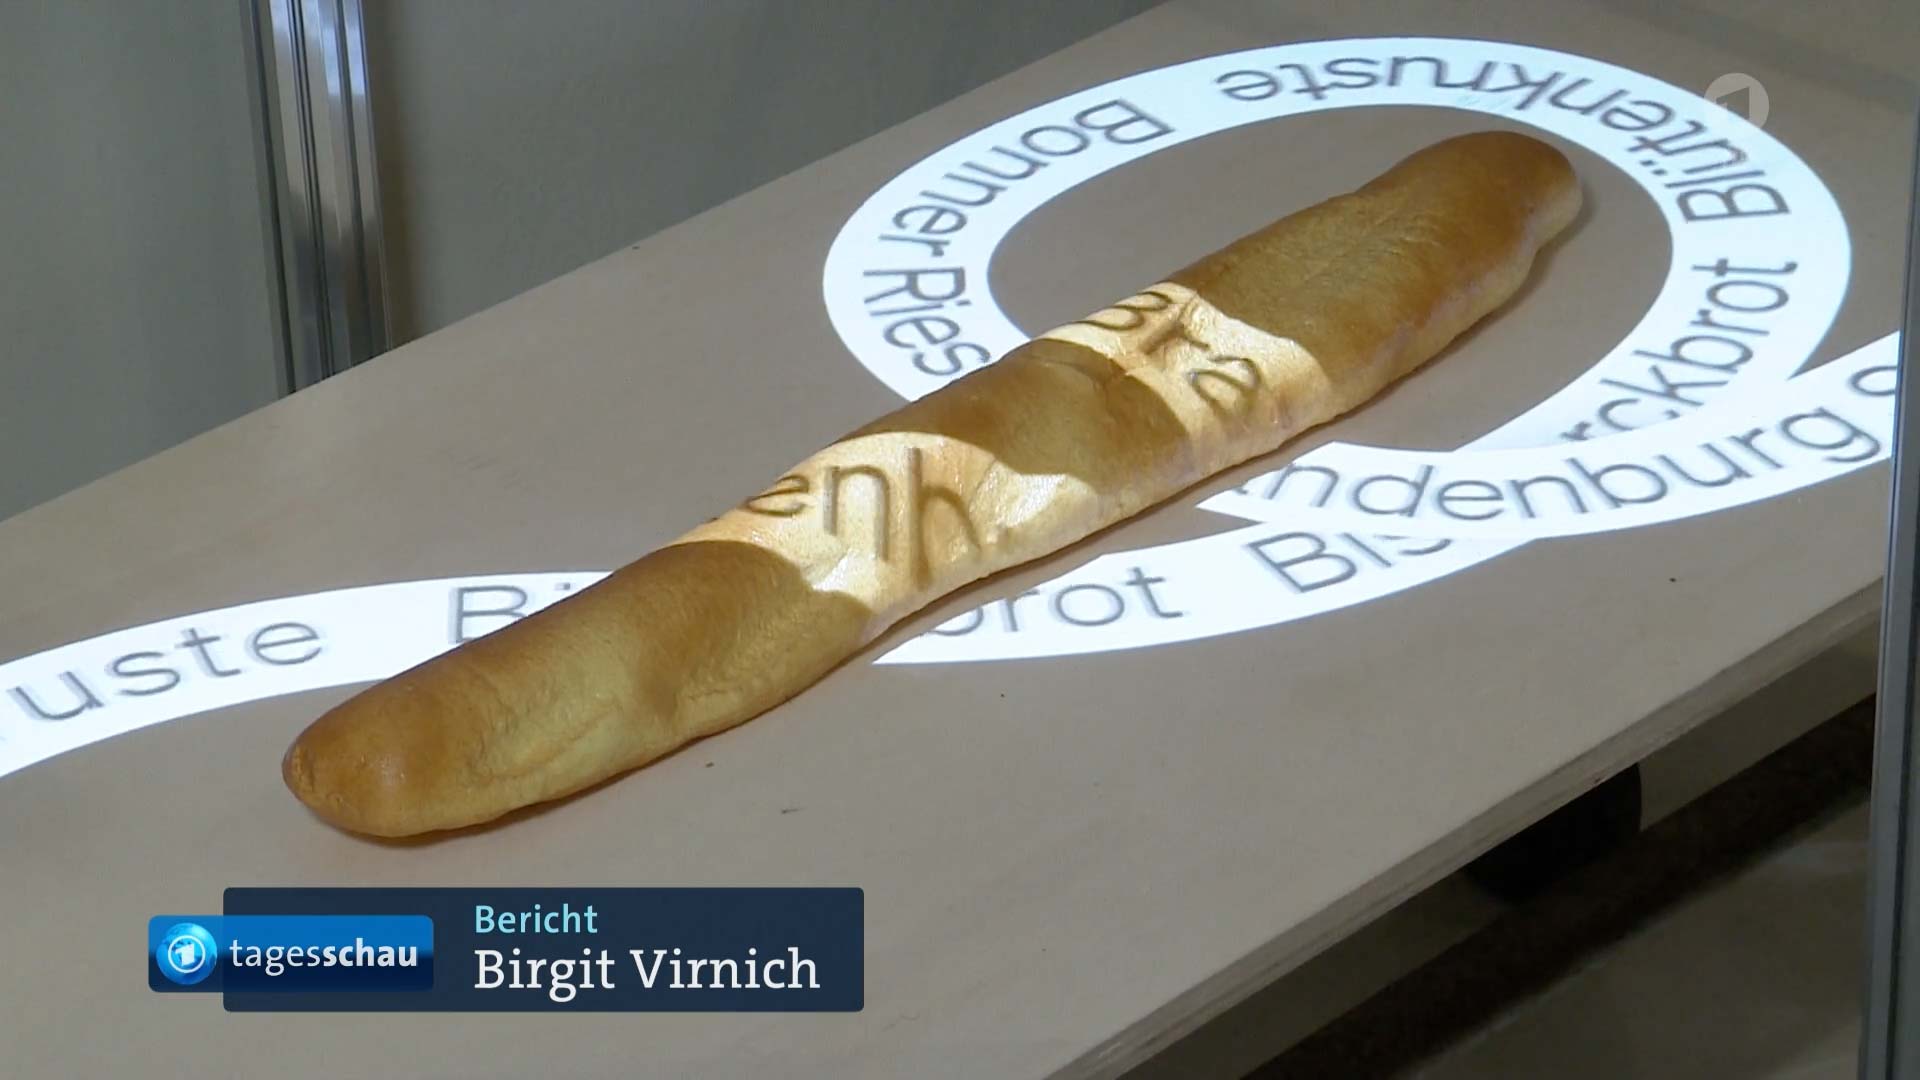 words are projected onto a baguette